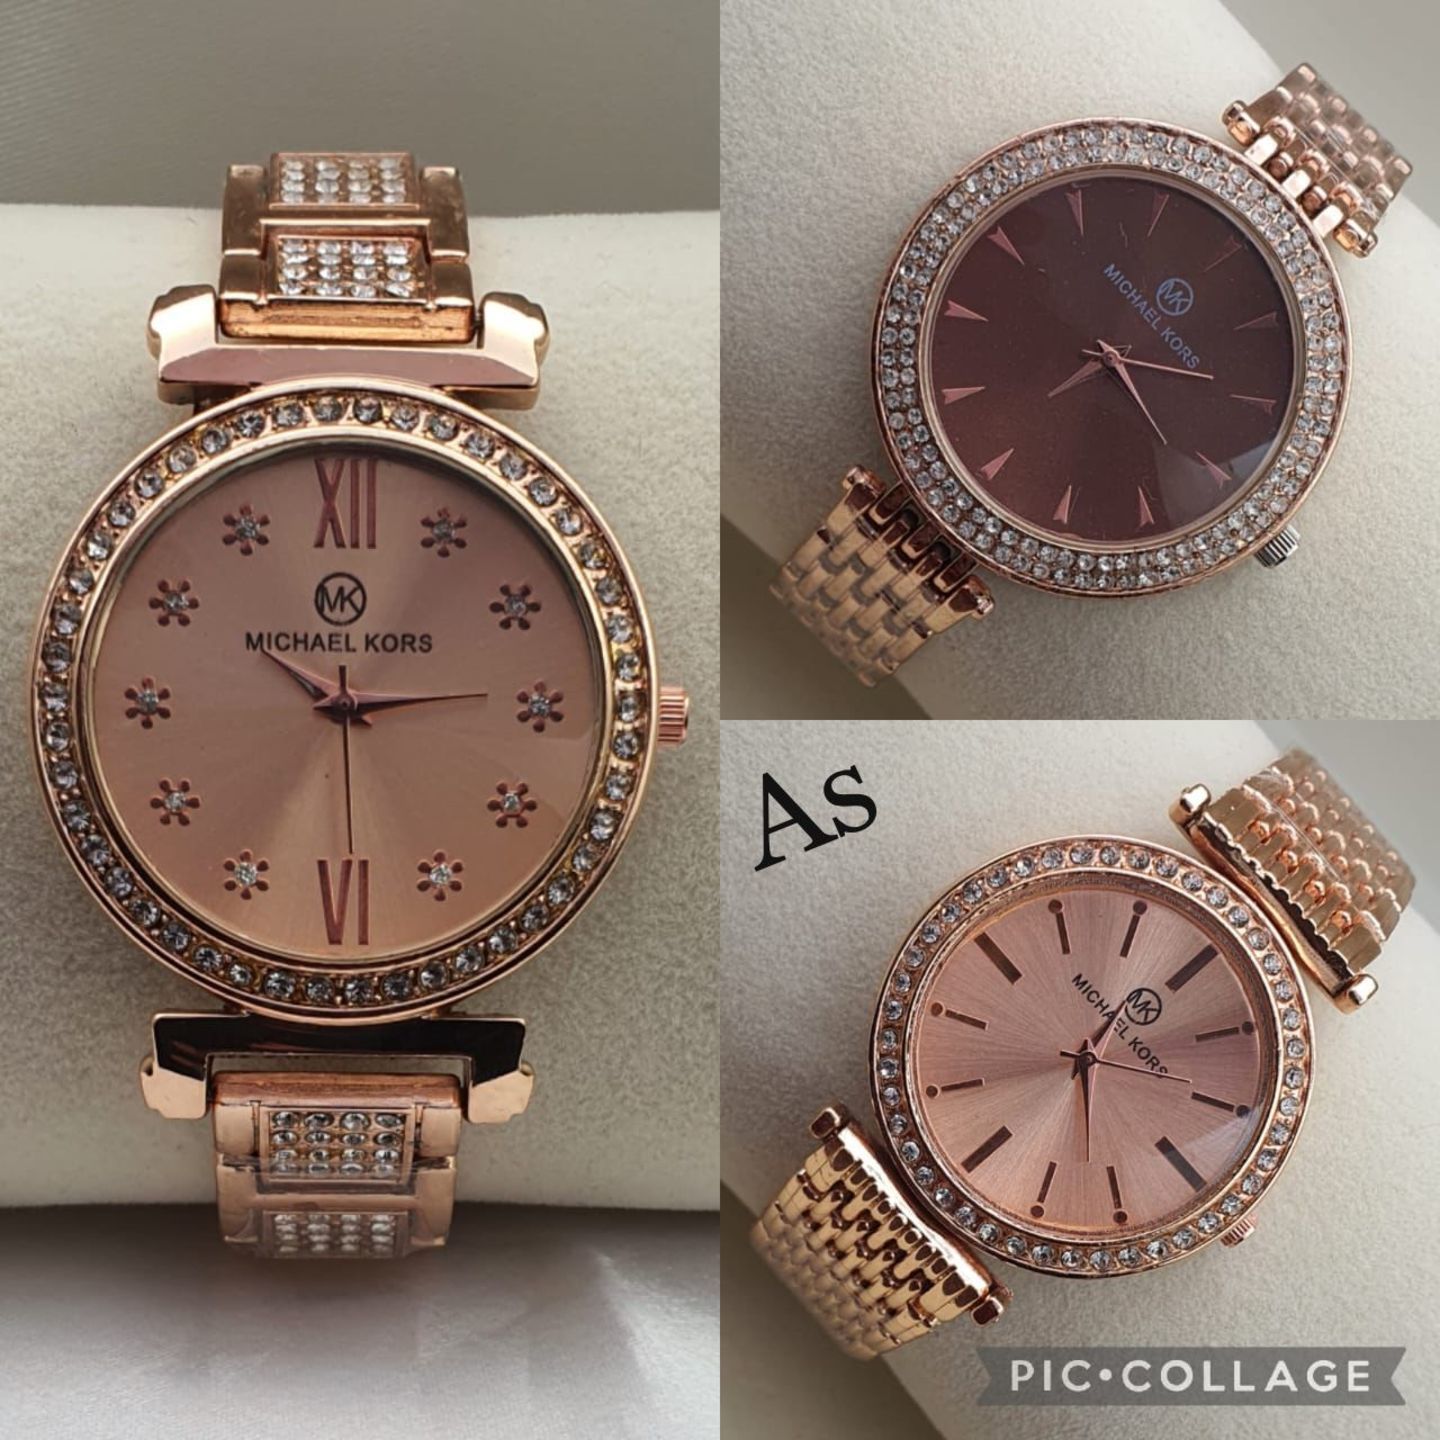 Ladies Micheal Kors Combo Watch Gift  Engagement, anniversary, valentines day, mothers day for sister, wife,friend,mother, baby shower